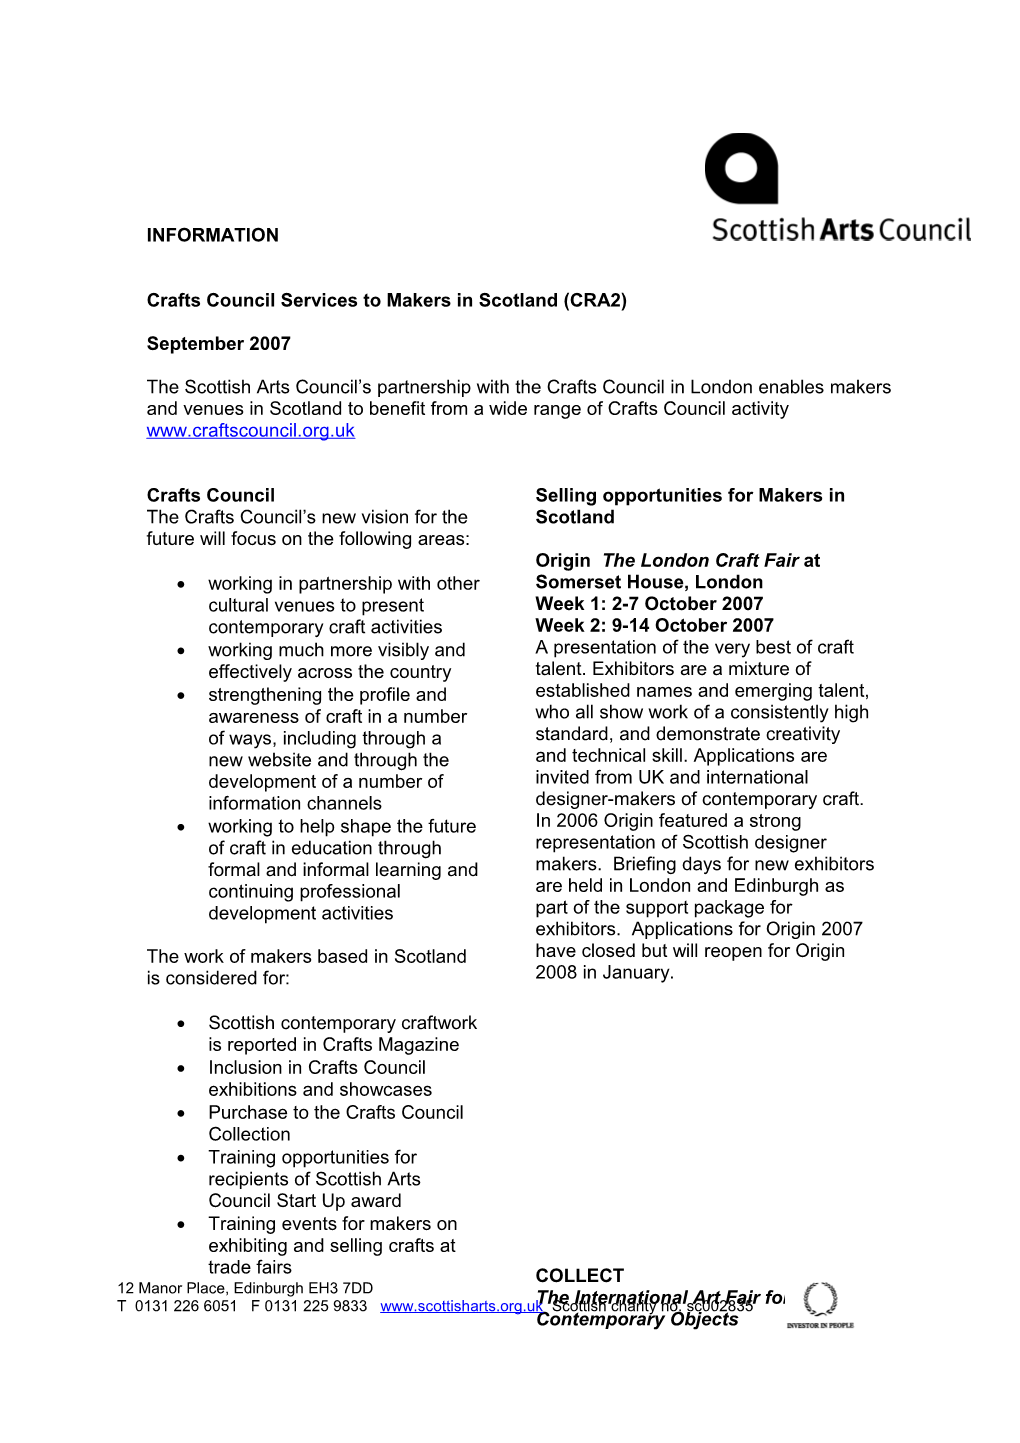 Crafts Council Services to Makers in Scotland (CRA2)